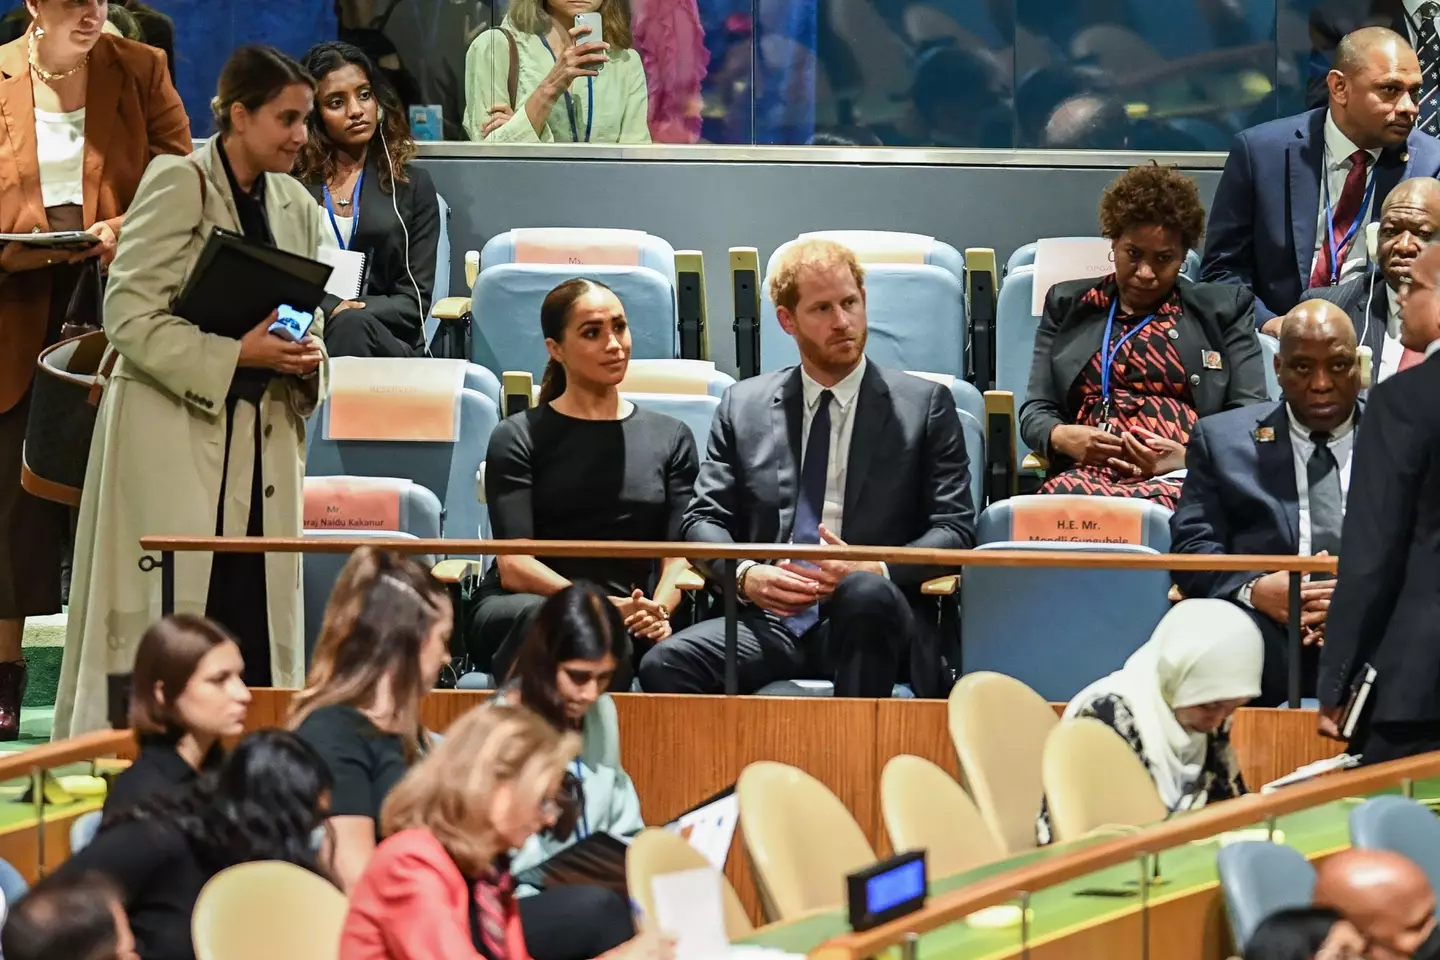 Meghan helped a woman during a United Nations meeting.